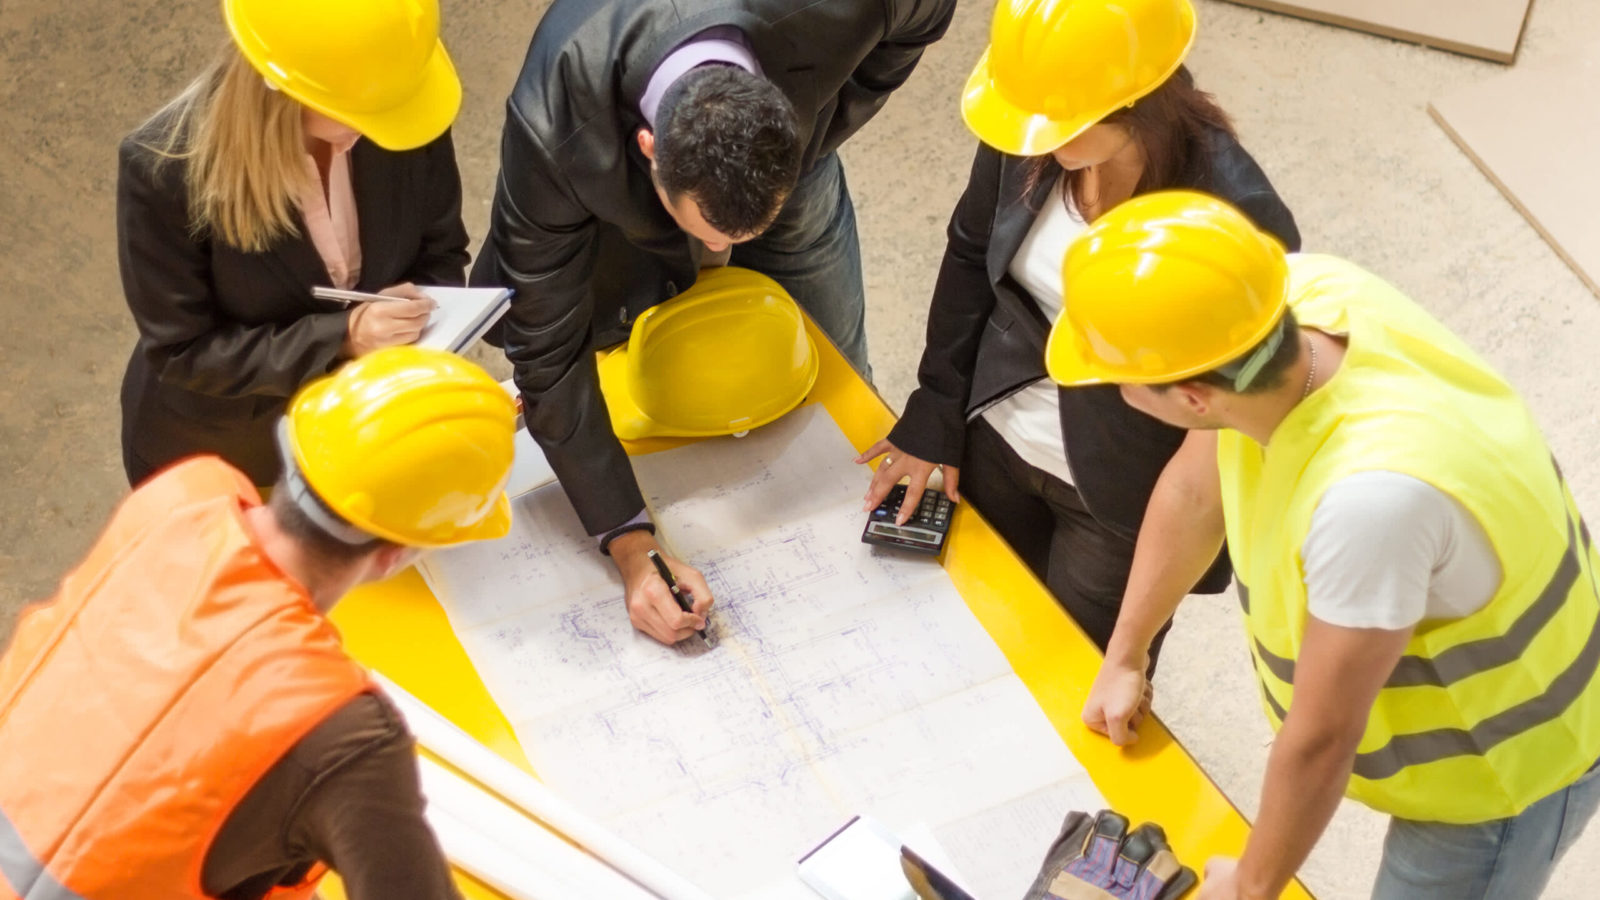 Is Project Management Necessary in Civil Engineering